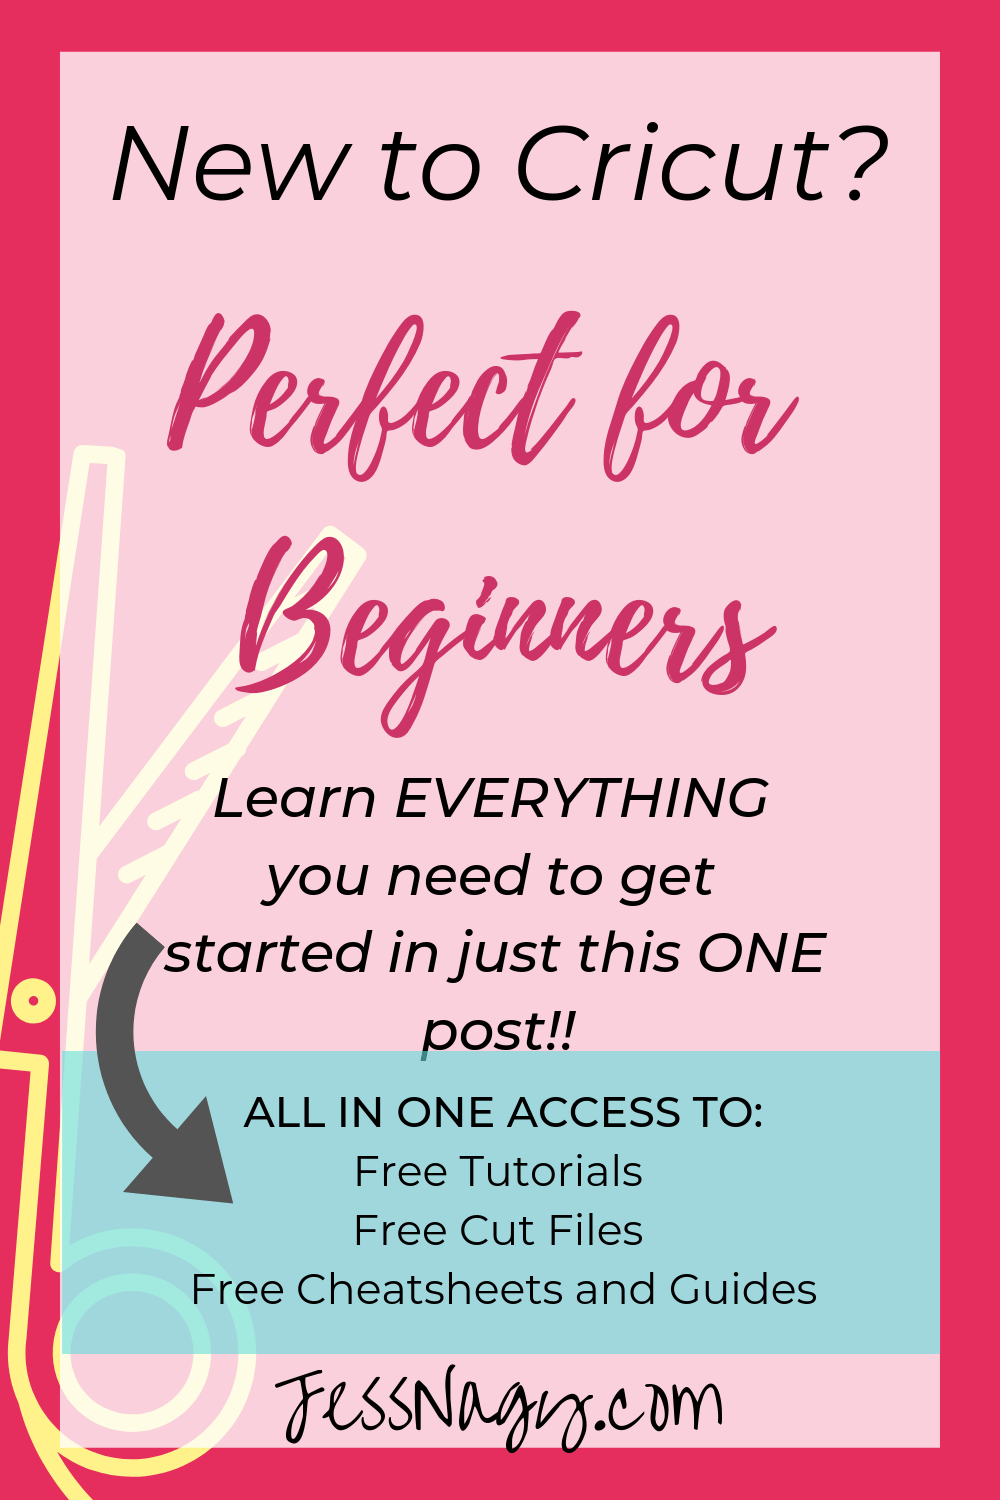 Pink background with yellow scissors on the side, text overlay New to Cricut? Pefect for beginners-Learn everything you need to get started in one post